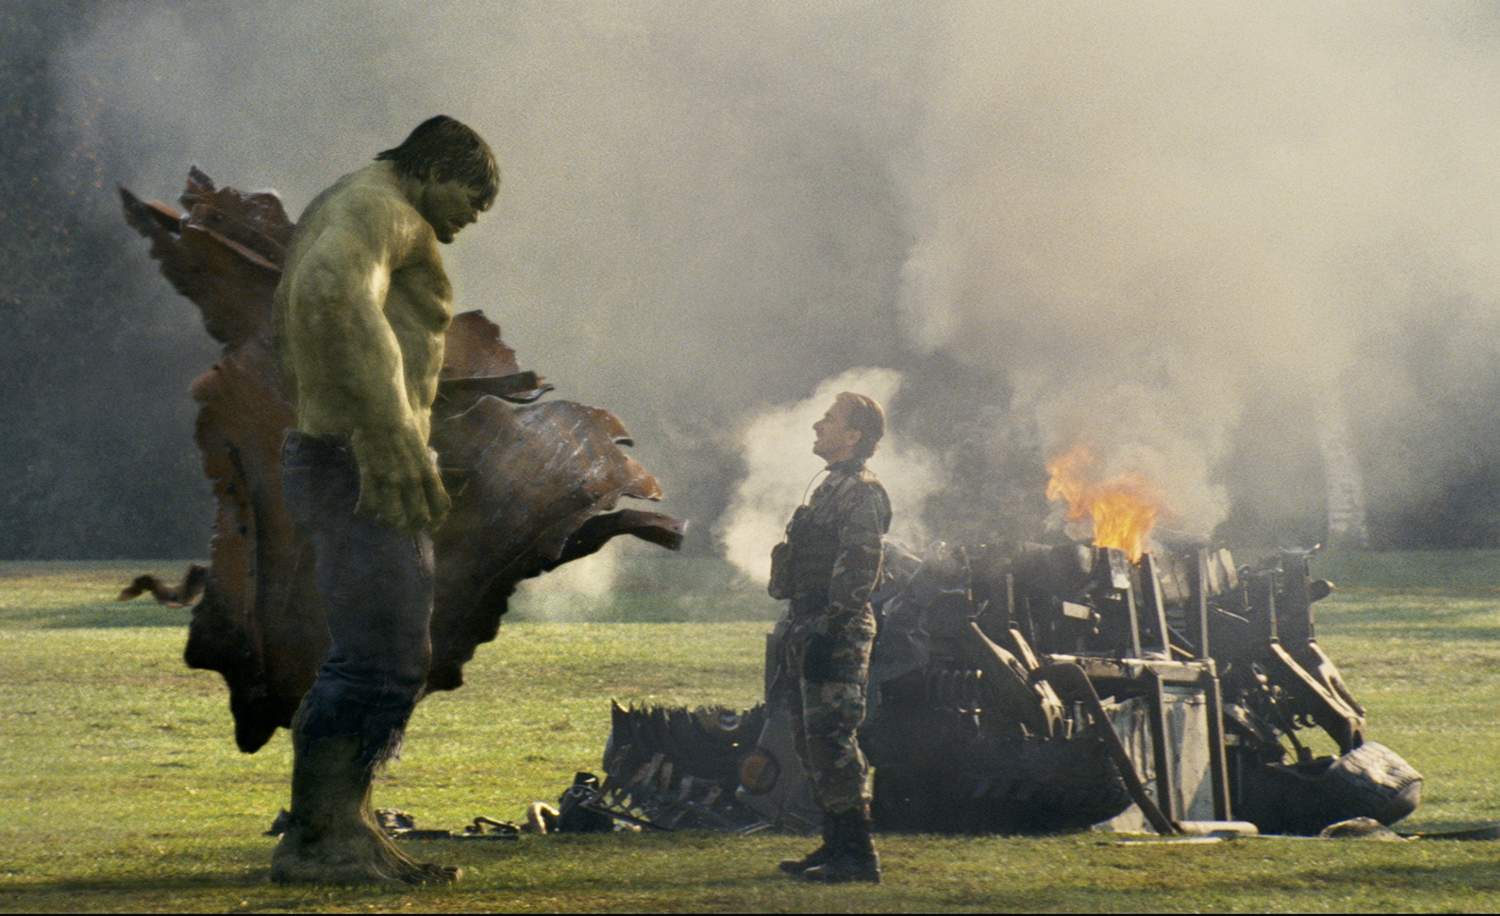 The Hulk and Tim Roth as Emil Blonsky in Universal Pictures' The Incredible Hulk (2008)